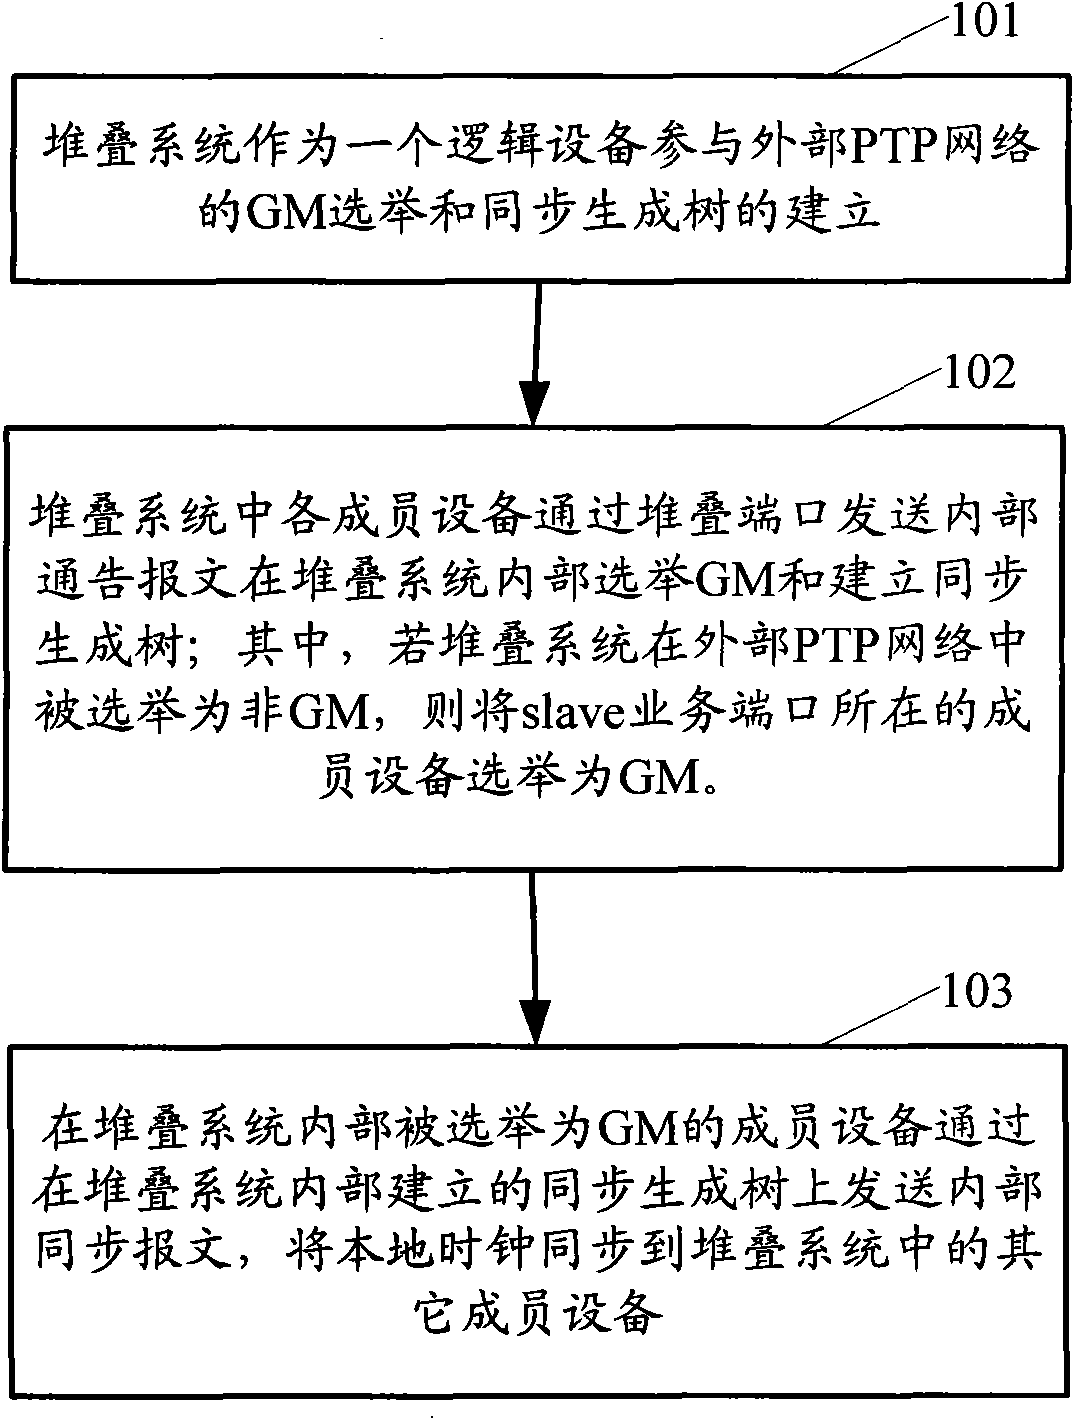 Time synchronization method for stacking system, stacking system and member equipment